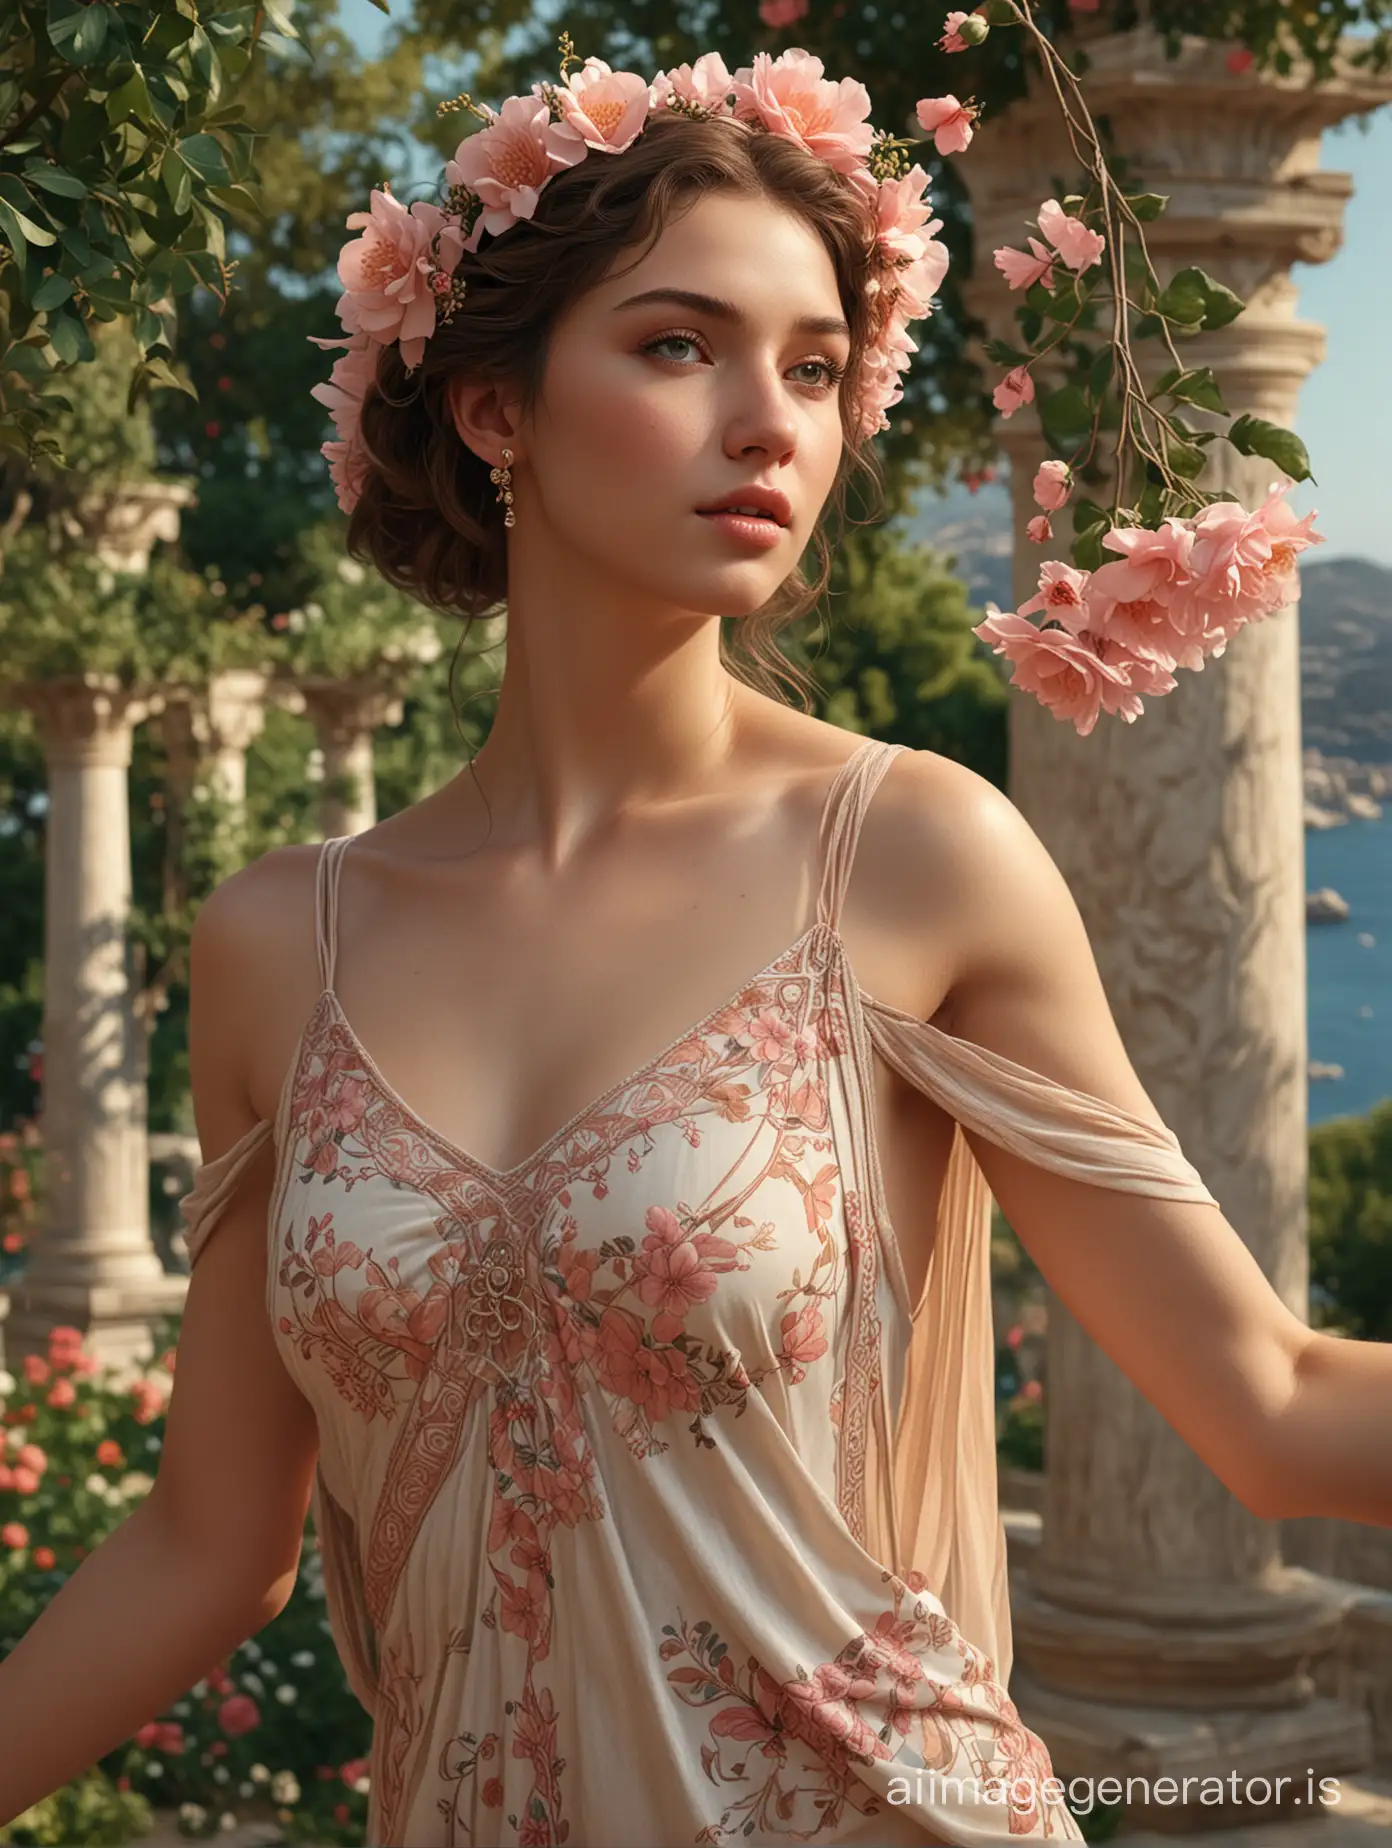 nude, 18 year old exceptional beauty, close-up Portrait of beautiful nude dancer in ancient Greek garden with opulent flowers, Aegean Sea in the background, dynamic dance pose, shy smile, sensual longing look, wearing rose shoulderless tunic, realistic, stunning realistic photograph, full lips, 3D render, Octane render, intricately detailed, cinematic, trending on ArtStation | Isometric | Centered hyper realistic cover photo awesome full color, hand drawn, dark, gritty, realistic style similar to Mucha, Klimt, Erte .12k, intricate. High definition, cinematic, Rough sketch, mix of bold dark lines and loose lines, bold lines, on paper